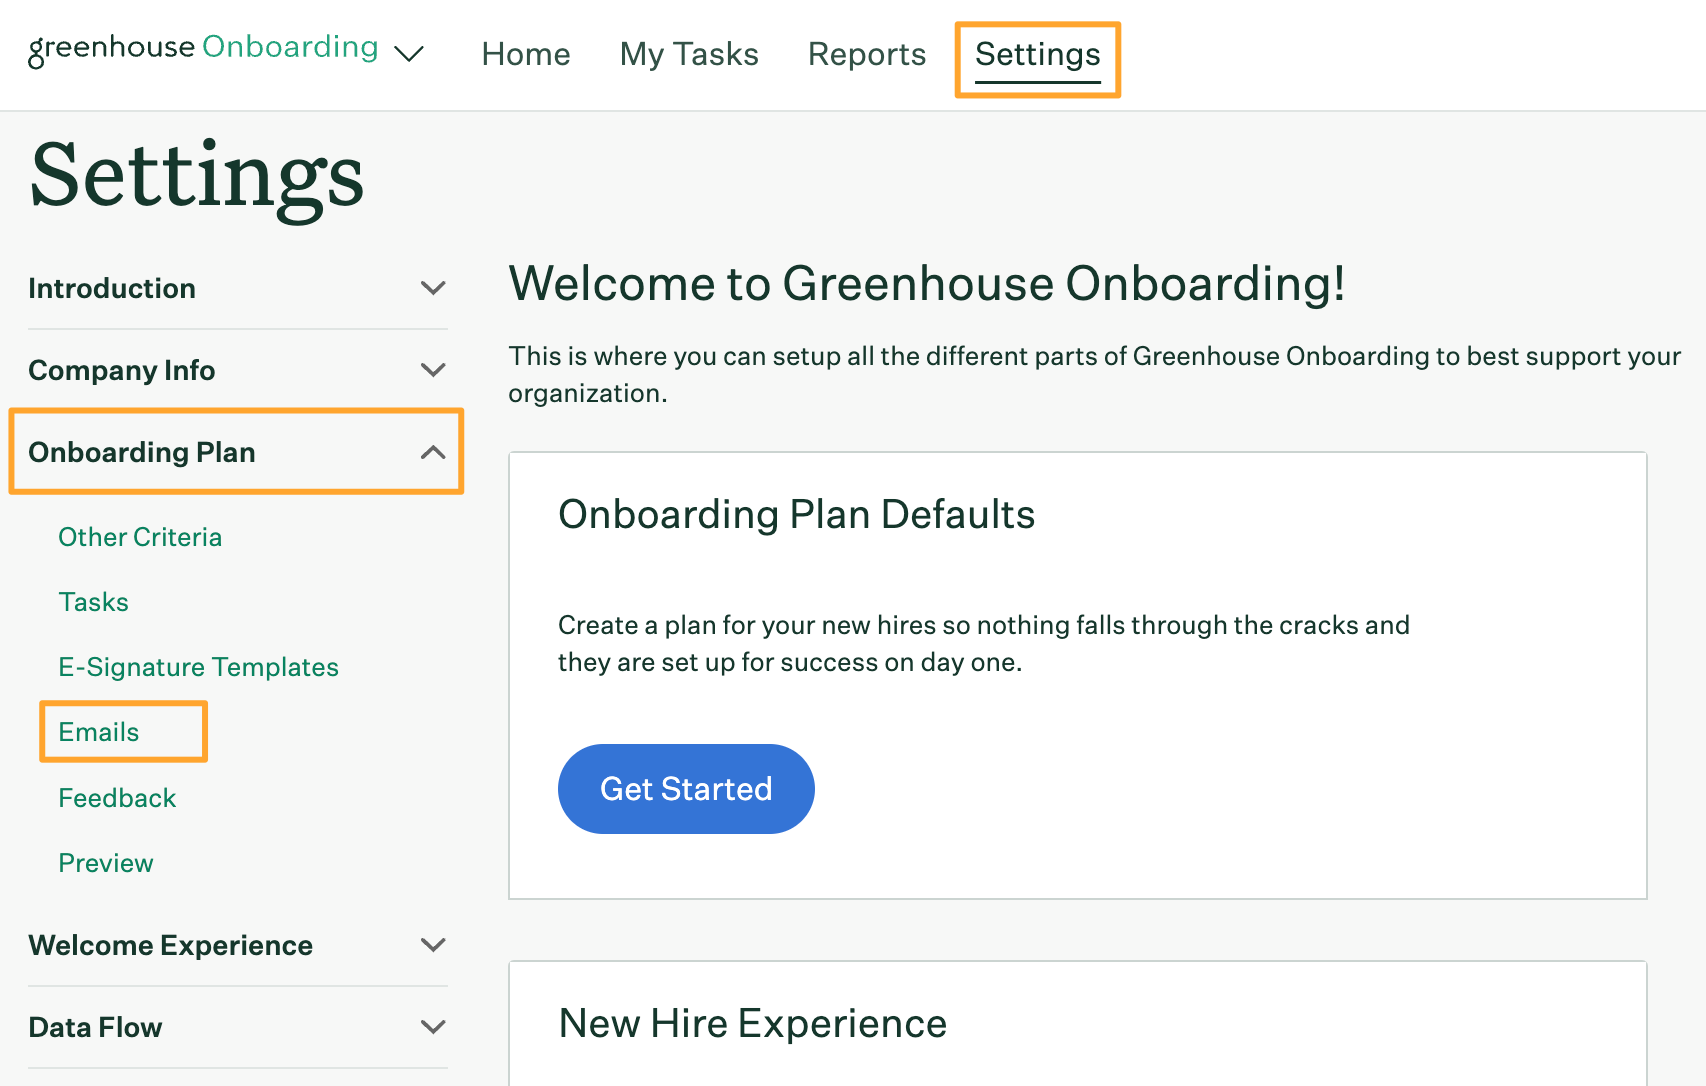 Greenhouse Onboarding Settings page with navigation to Onboarding Plan and Emails tabs highlighted